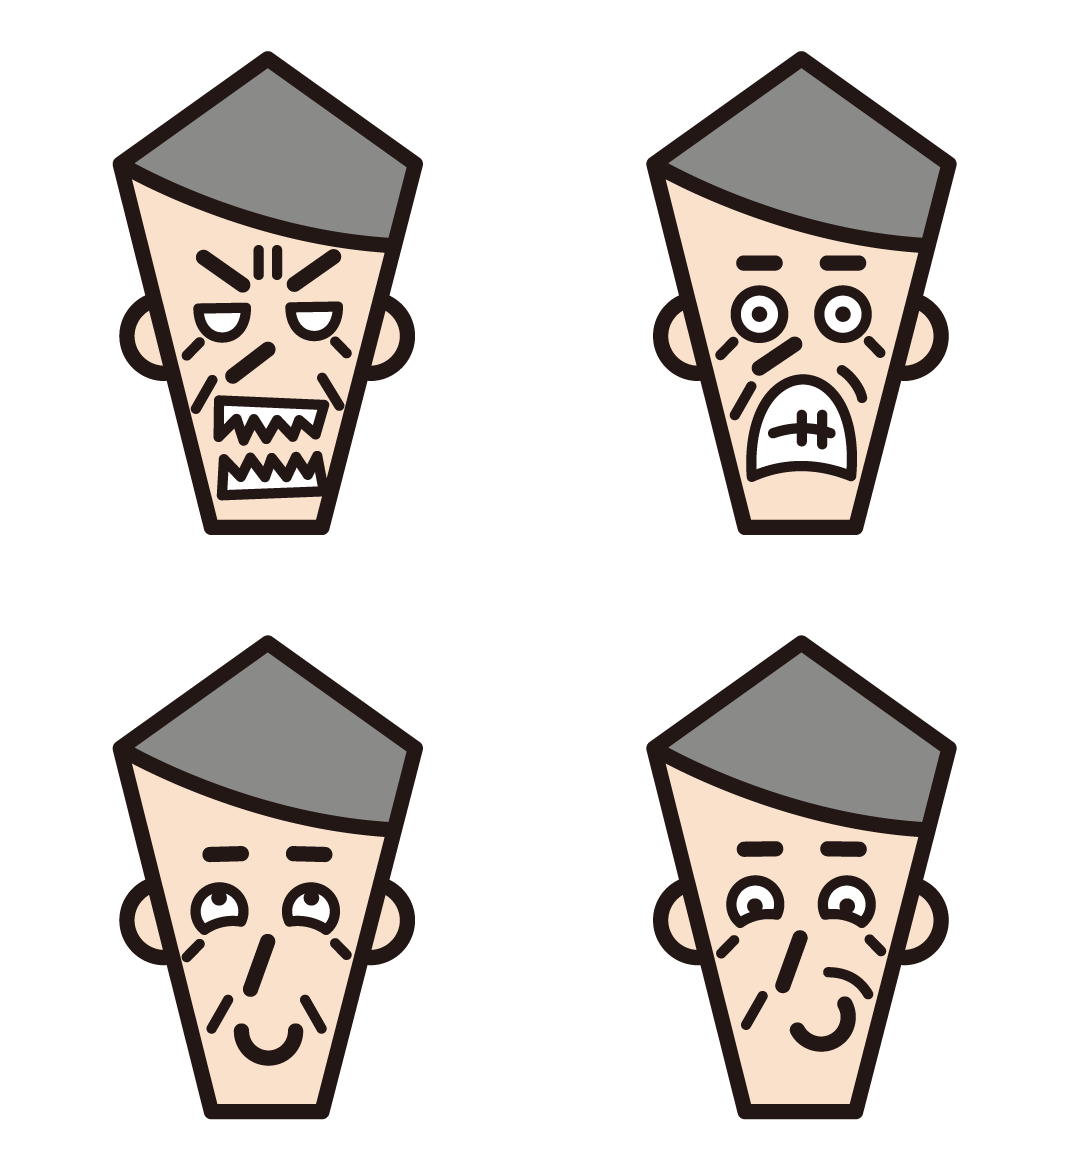 4 illustrations of the various expressions of the old man